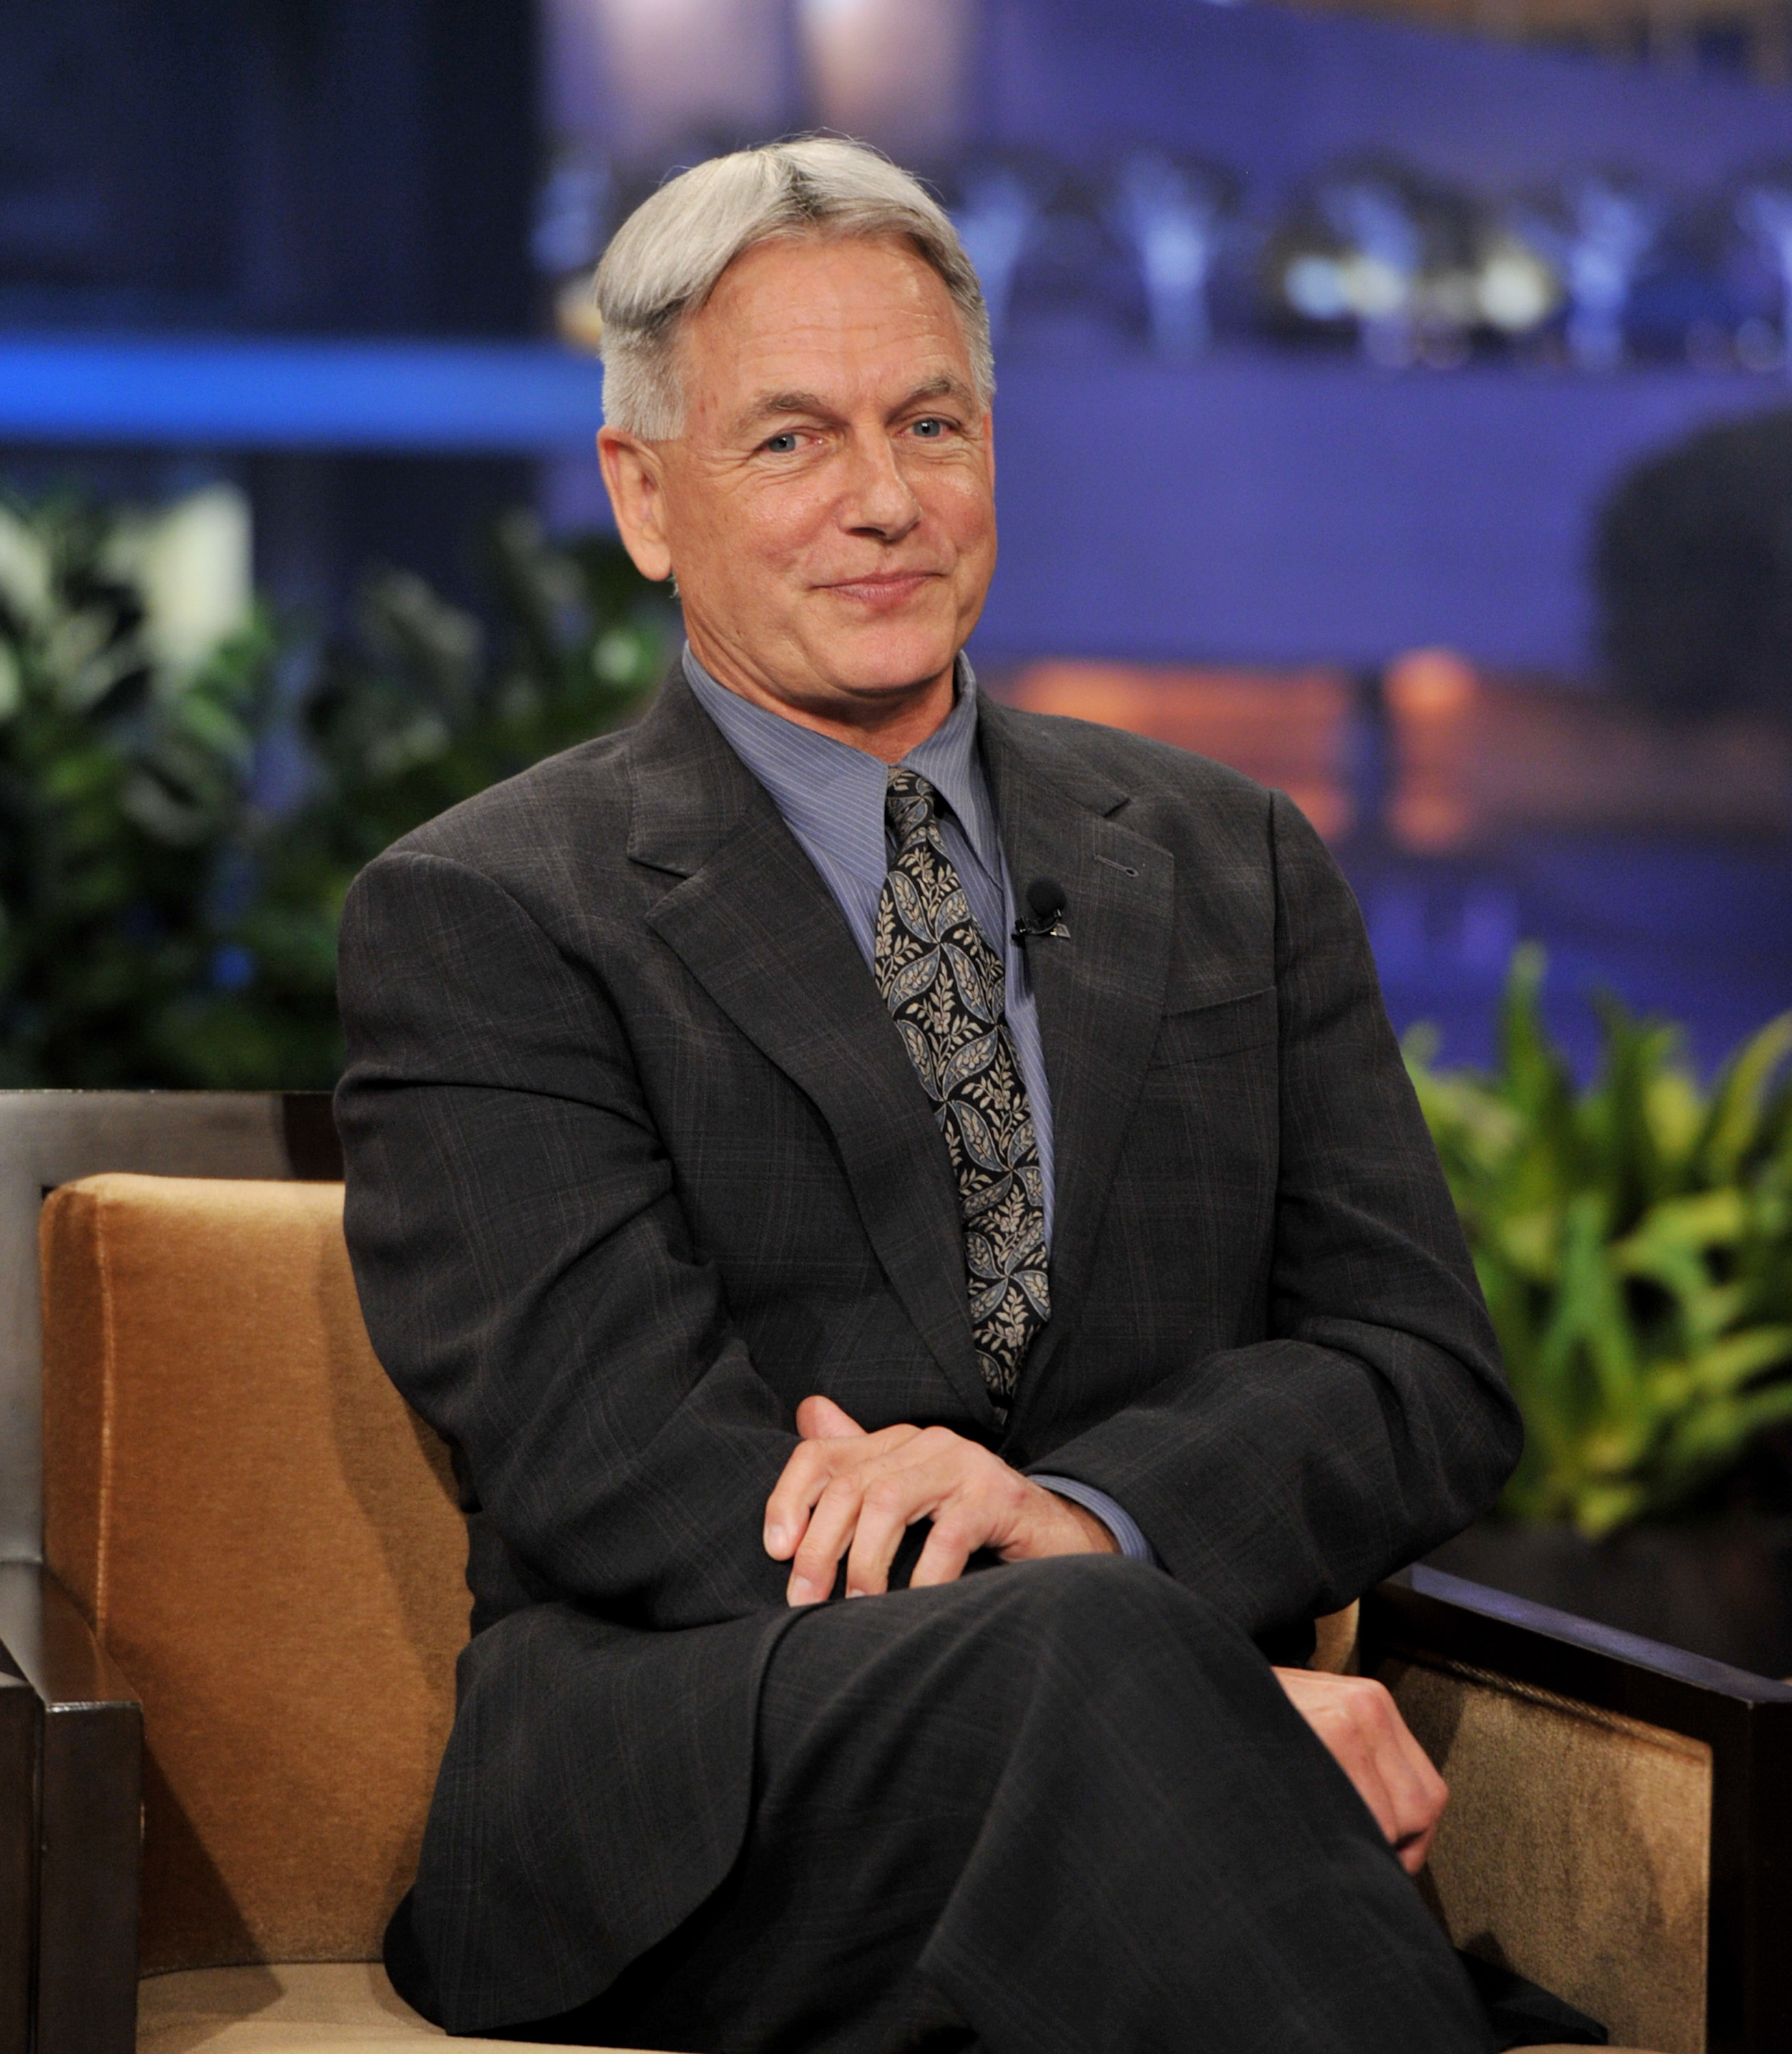 Mark Harmon on the "Tonight Show With Jay Leno" at NBC Studios on January 31, 2012, in Burbank, California. | Source: Getty Images